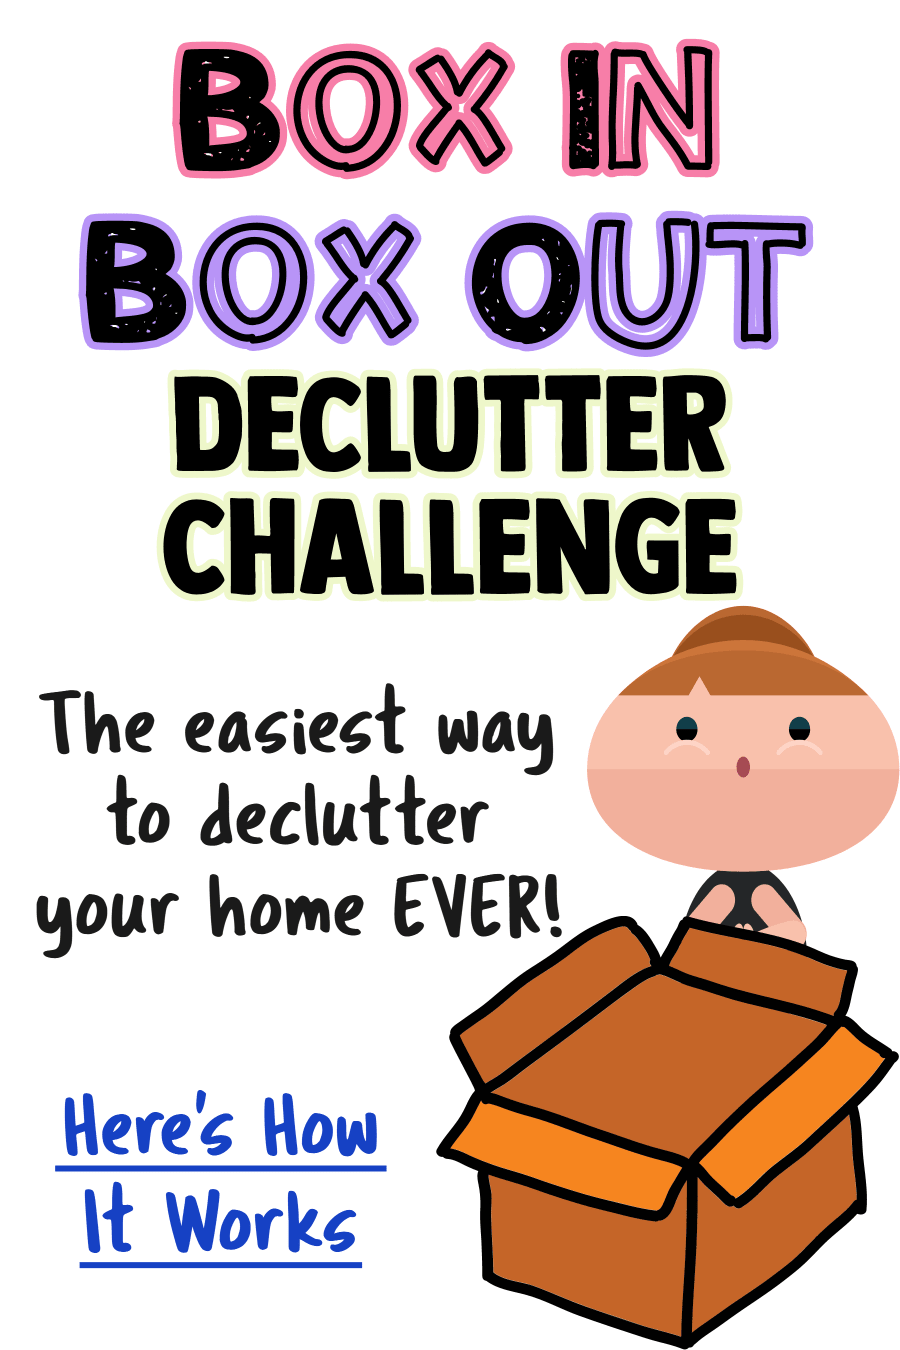 Decluttering Ideas To Easily Declutter and Organize Your Home - All the organization ideas in the world won't work unless you declutter your home FIRST and KEEP it clean and clutter-free.  This easy Declutter Challenge helps you get rid of clutter the easy way and won't leave you feeling overwhelmed when organizing.  Declutter room by room with this simple declutter challenge from our Decluttering Club at Decluttering Your Life.